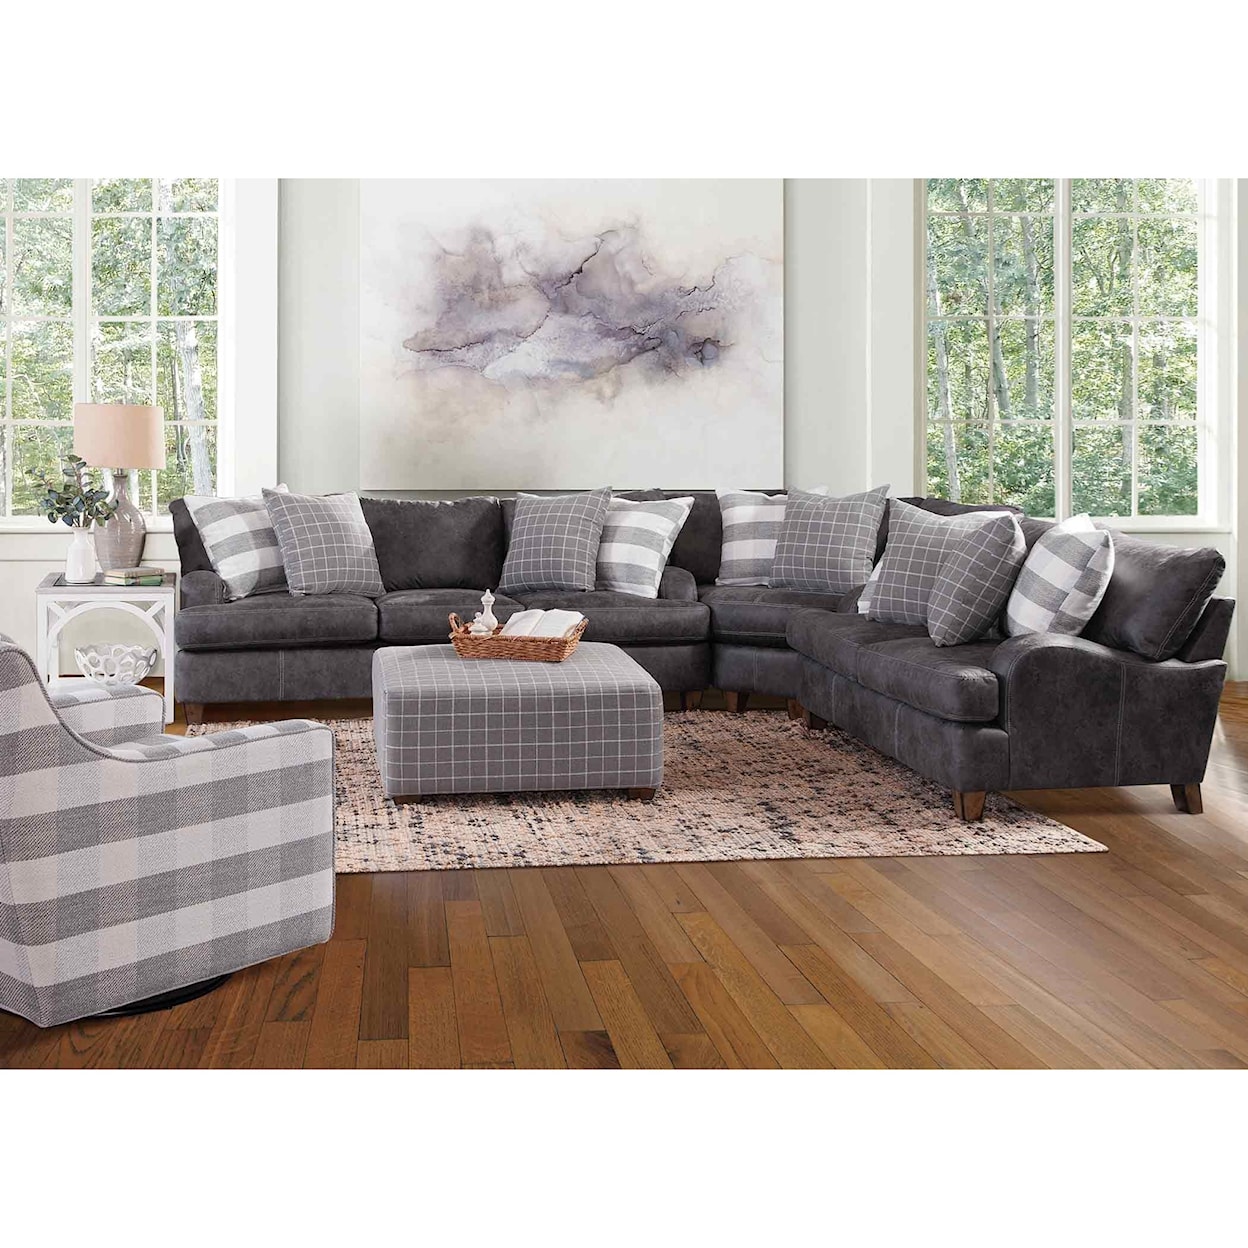 Franklin 993 Darby Sectional